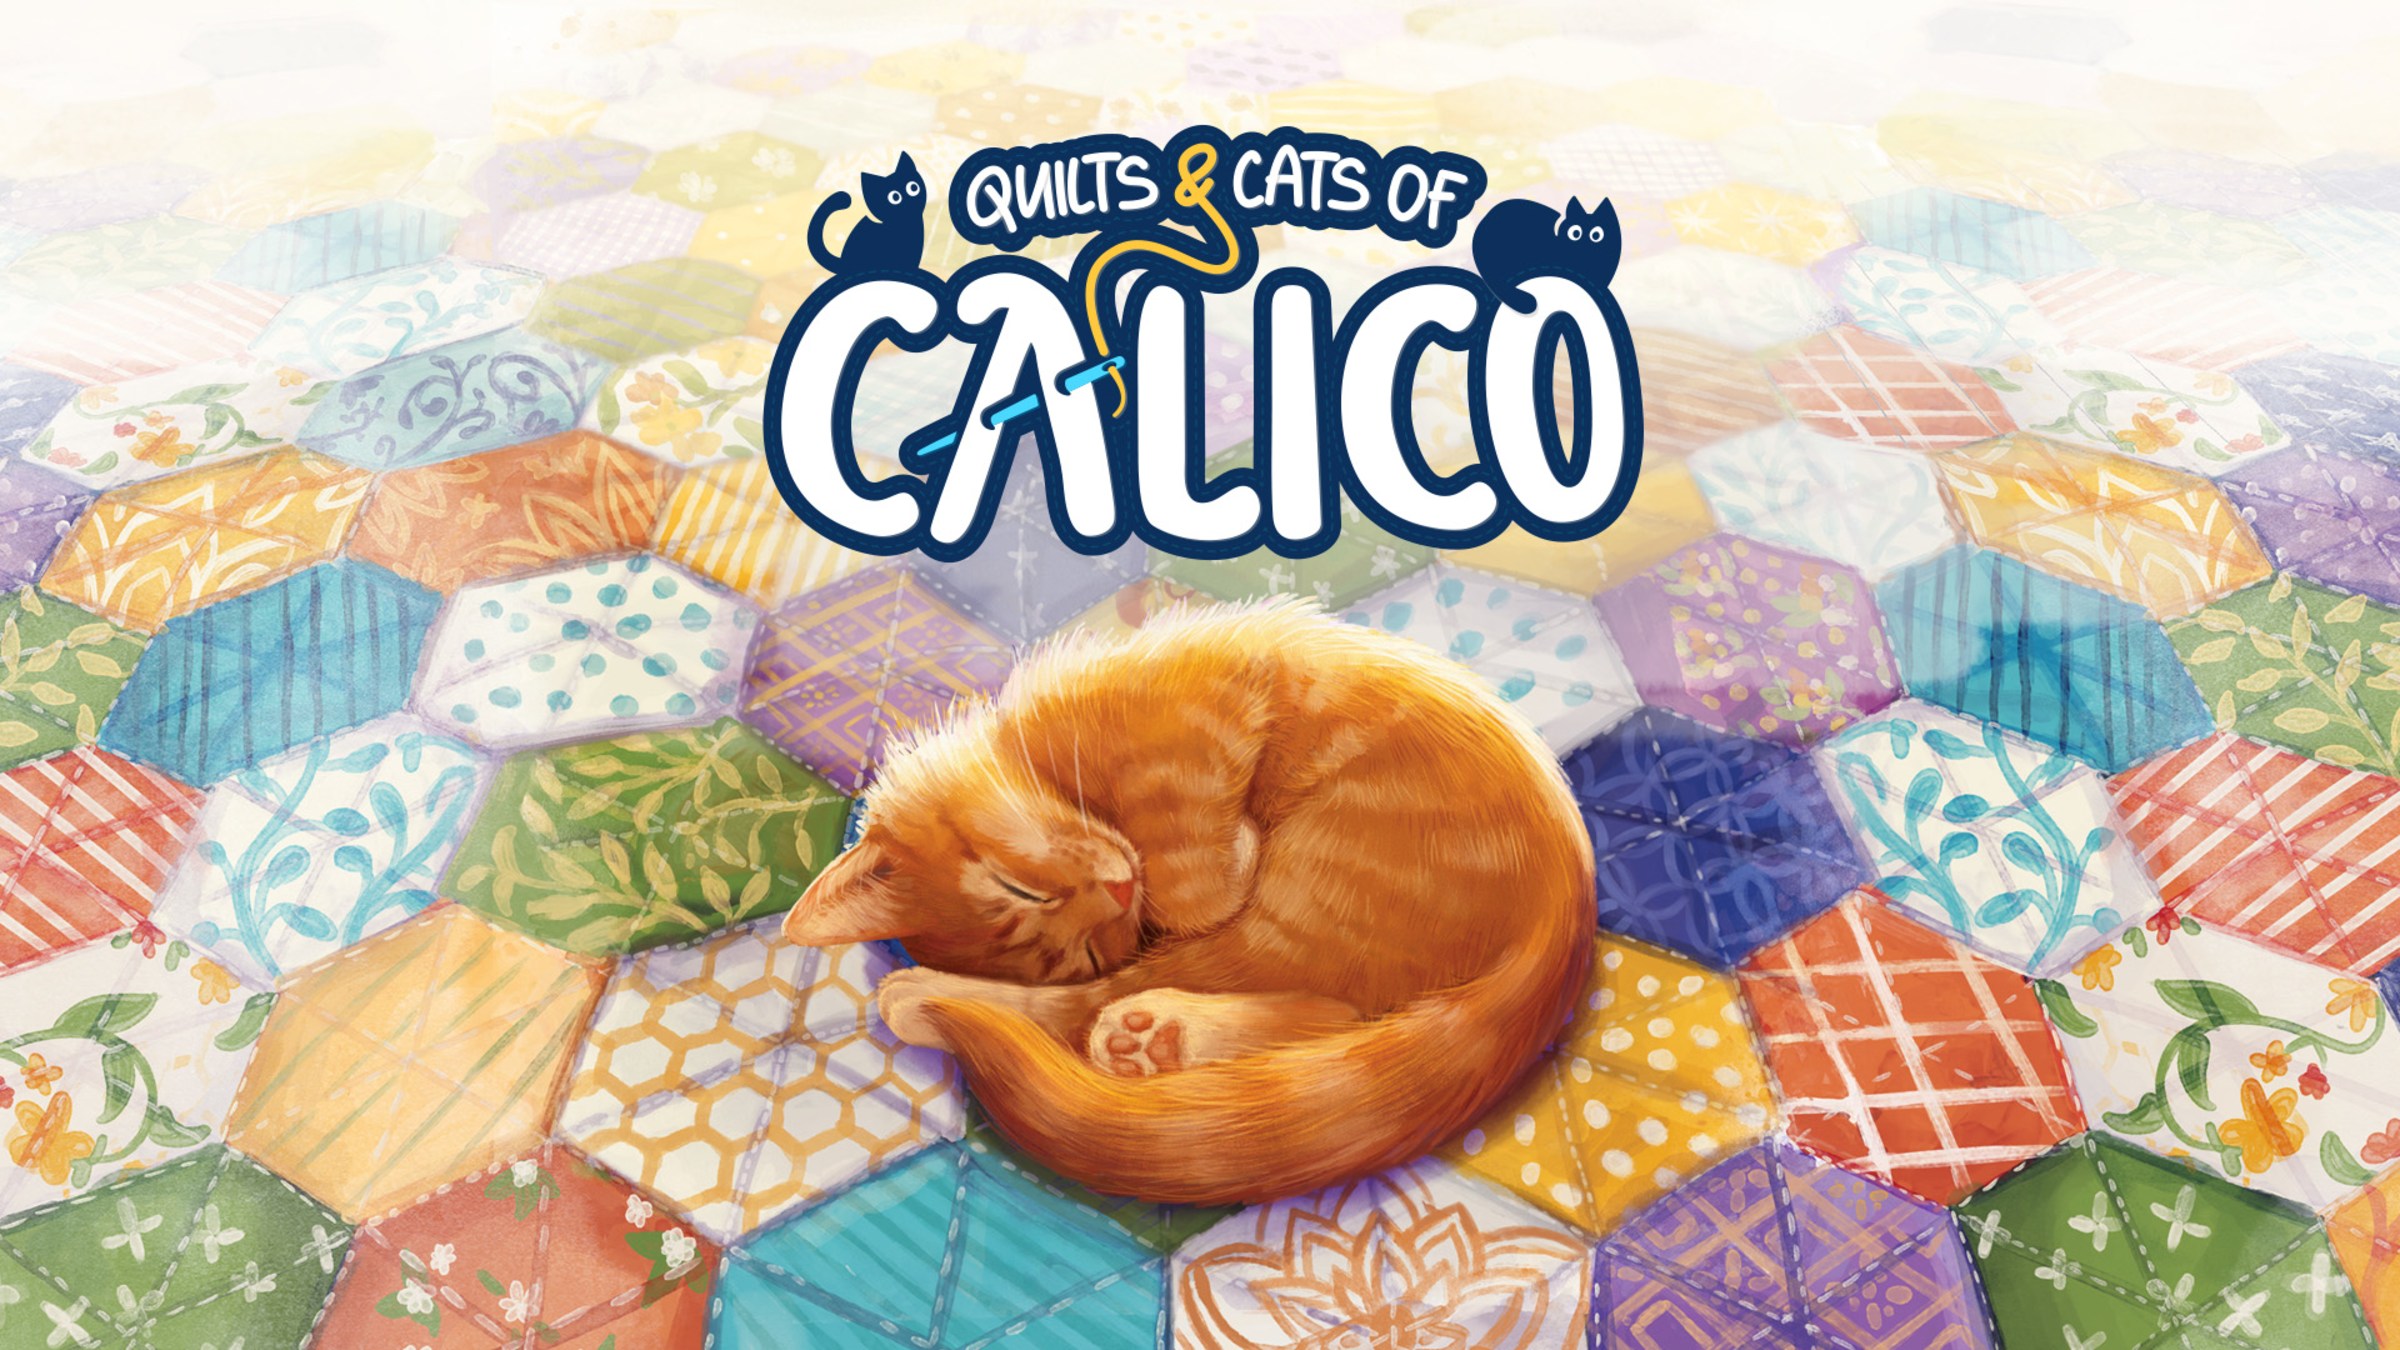 Quilts and Cats of Calico PC Torrent Version Full Game Setup Free Download